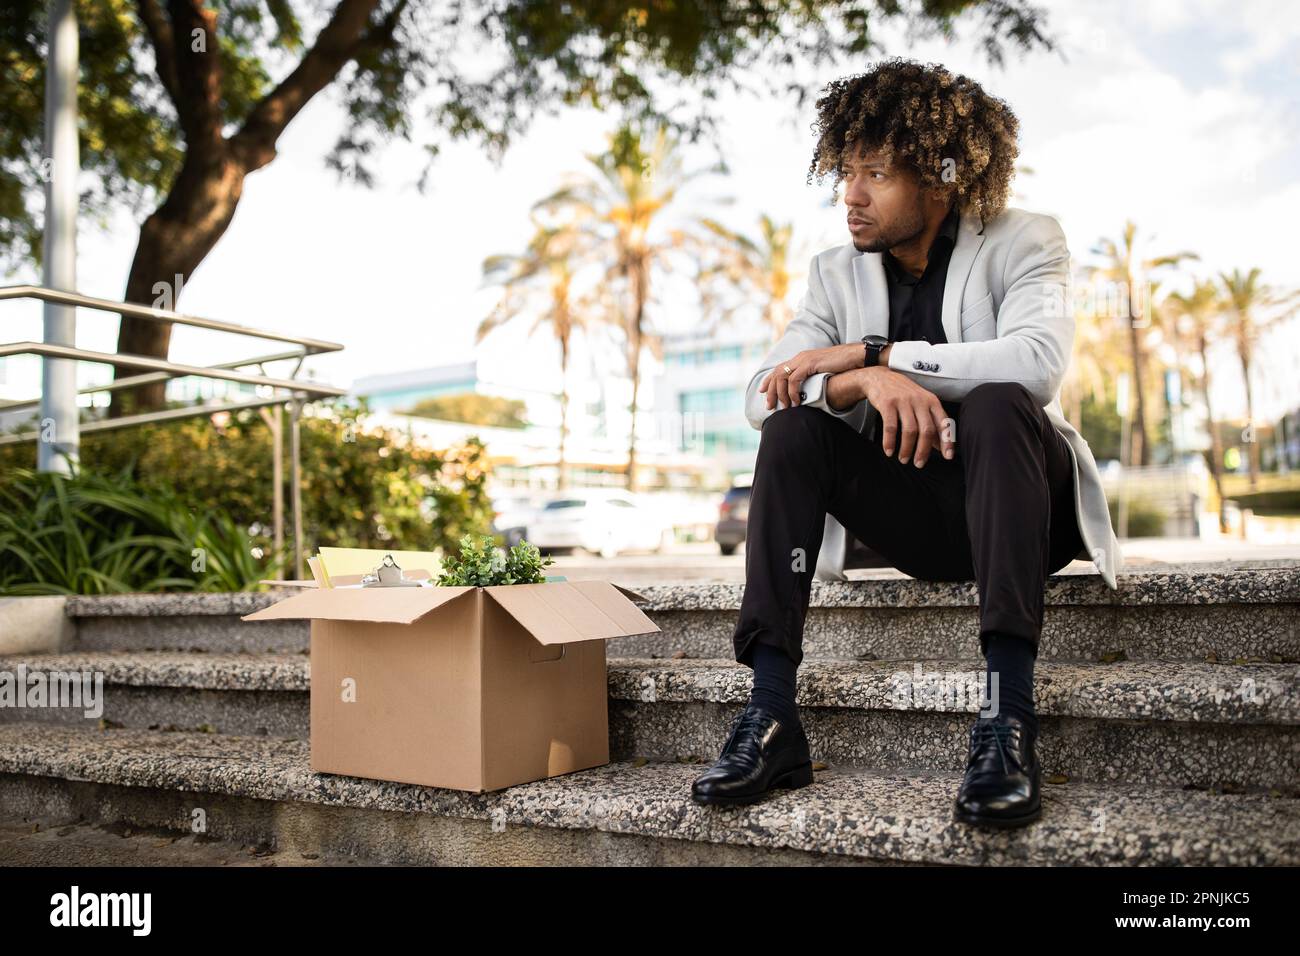 Crisis and unemployment. Upset black middle aged office worker sitting with box of personal stuff on stairs outdoors Stock Photo